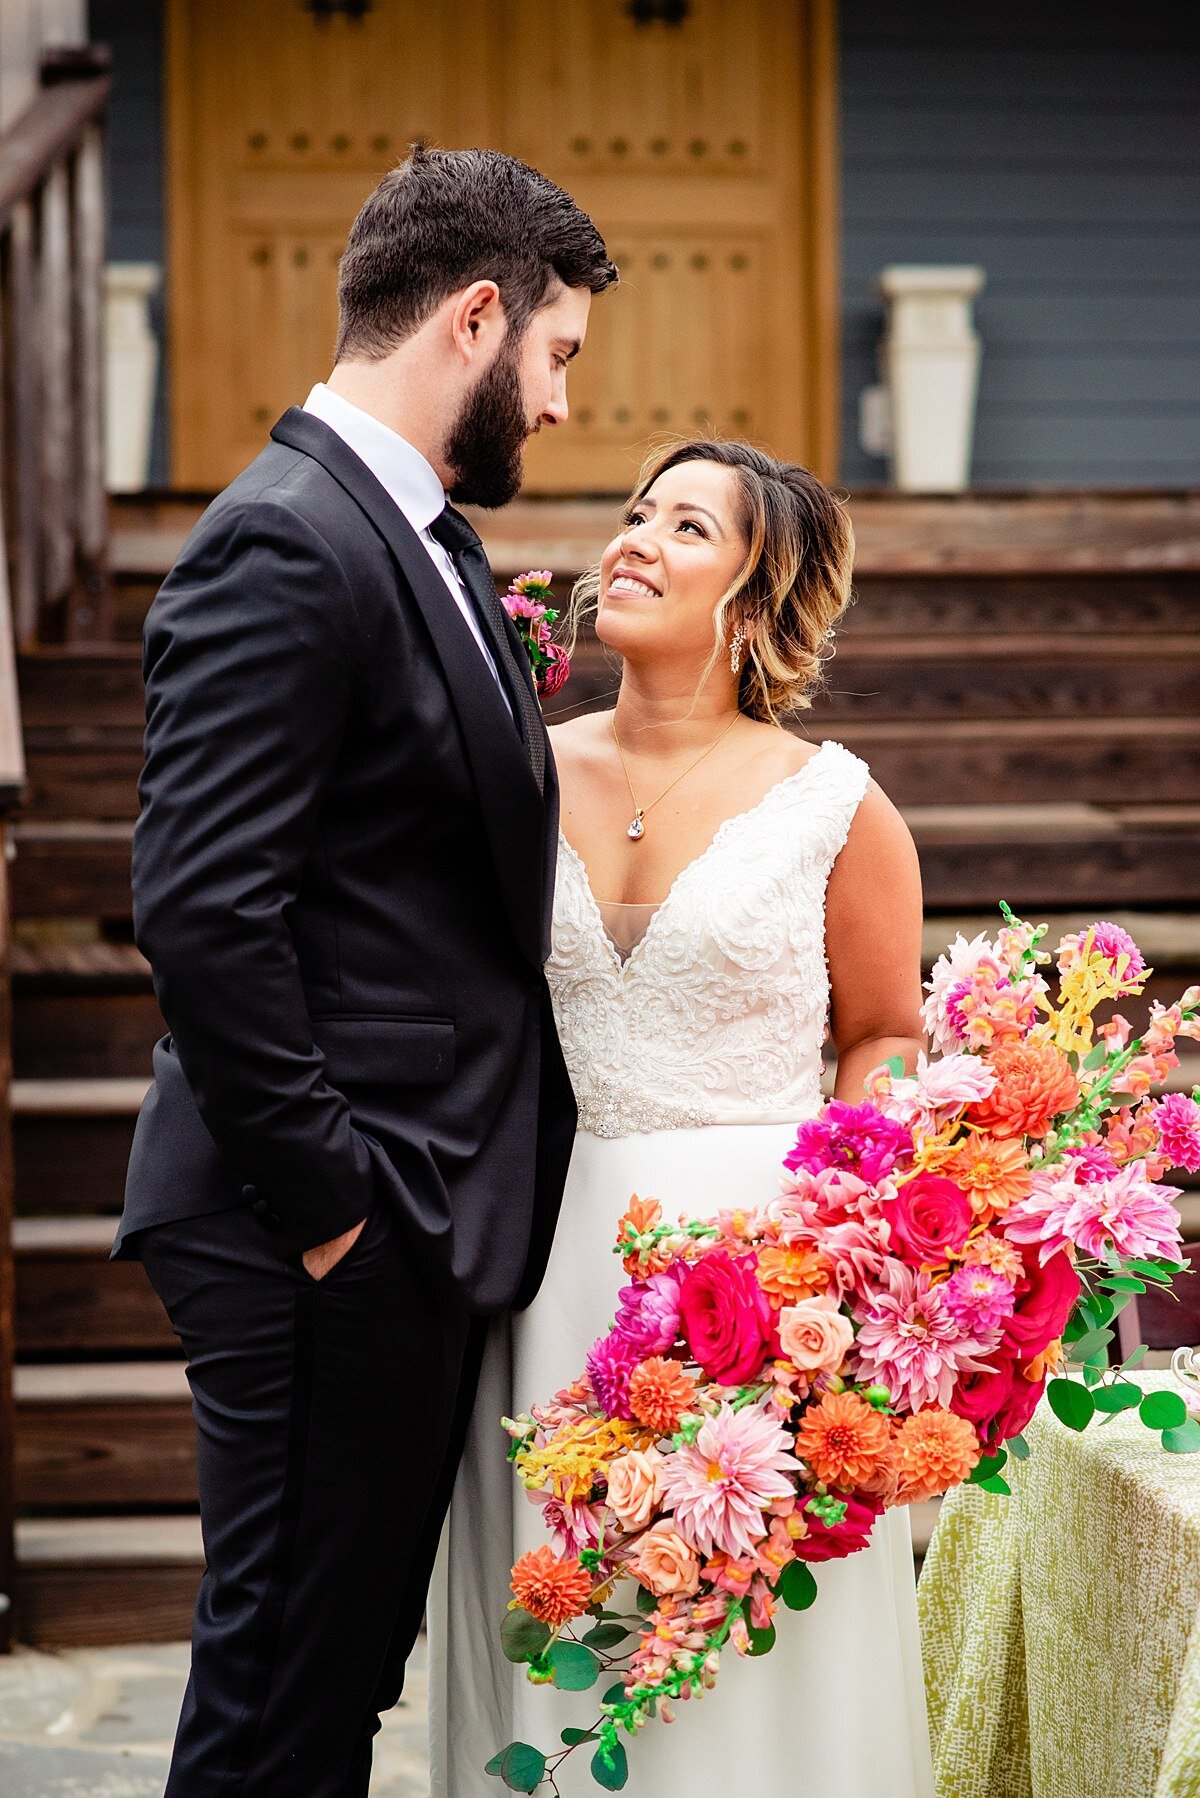 Couple standing together, she has a large horizontal pink red and orange wedding bouquet